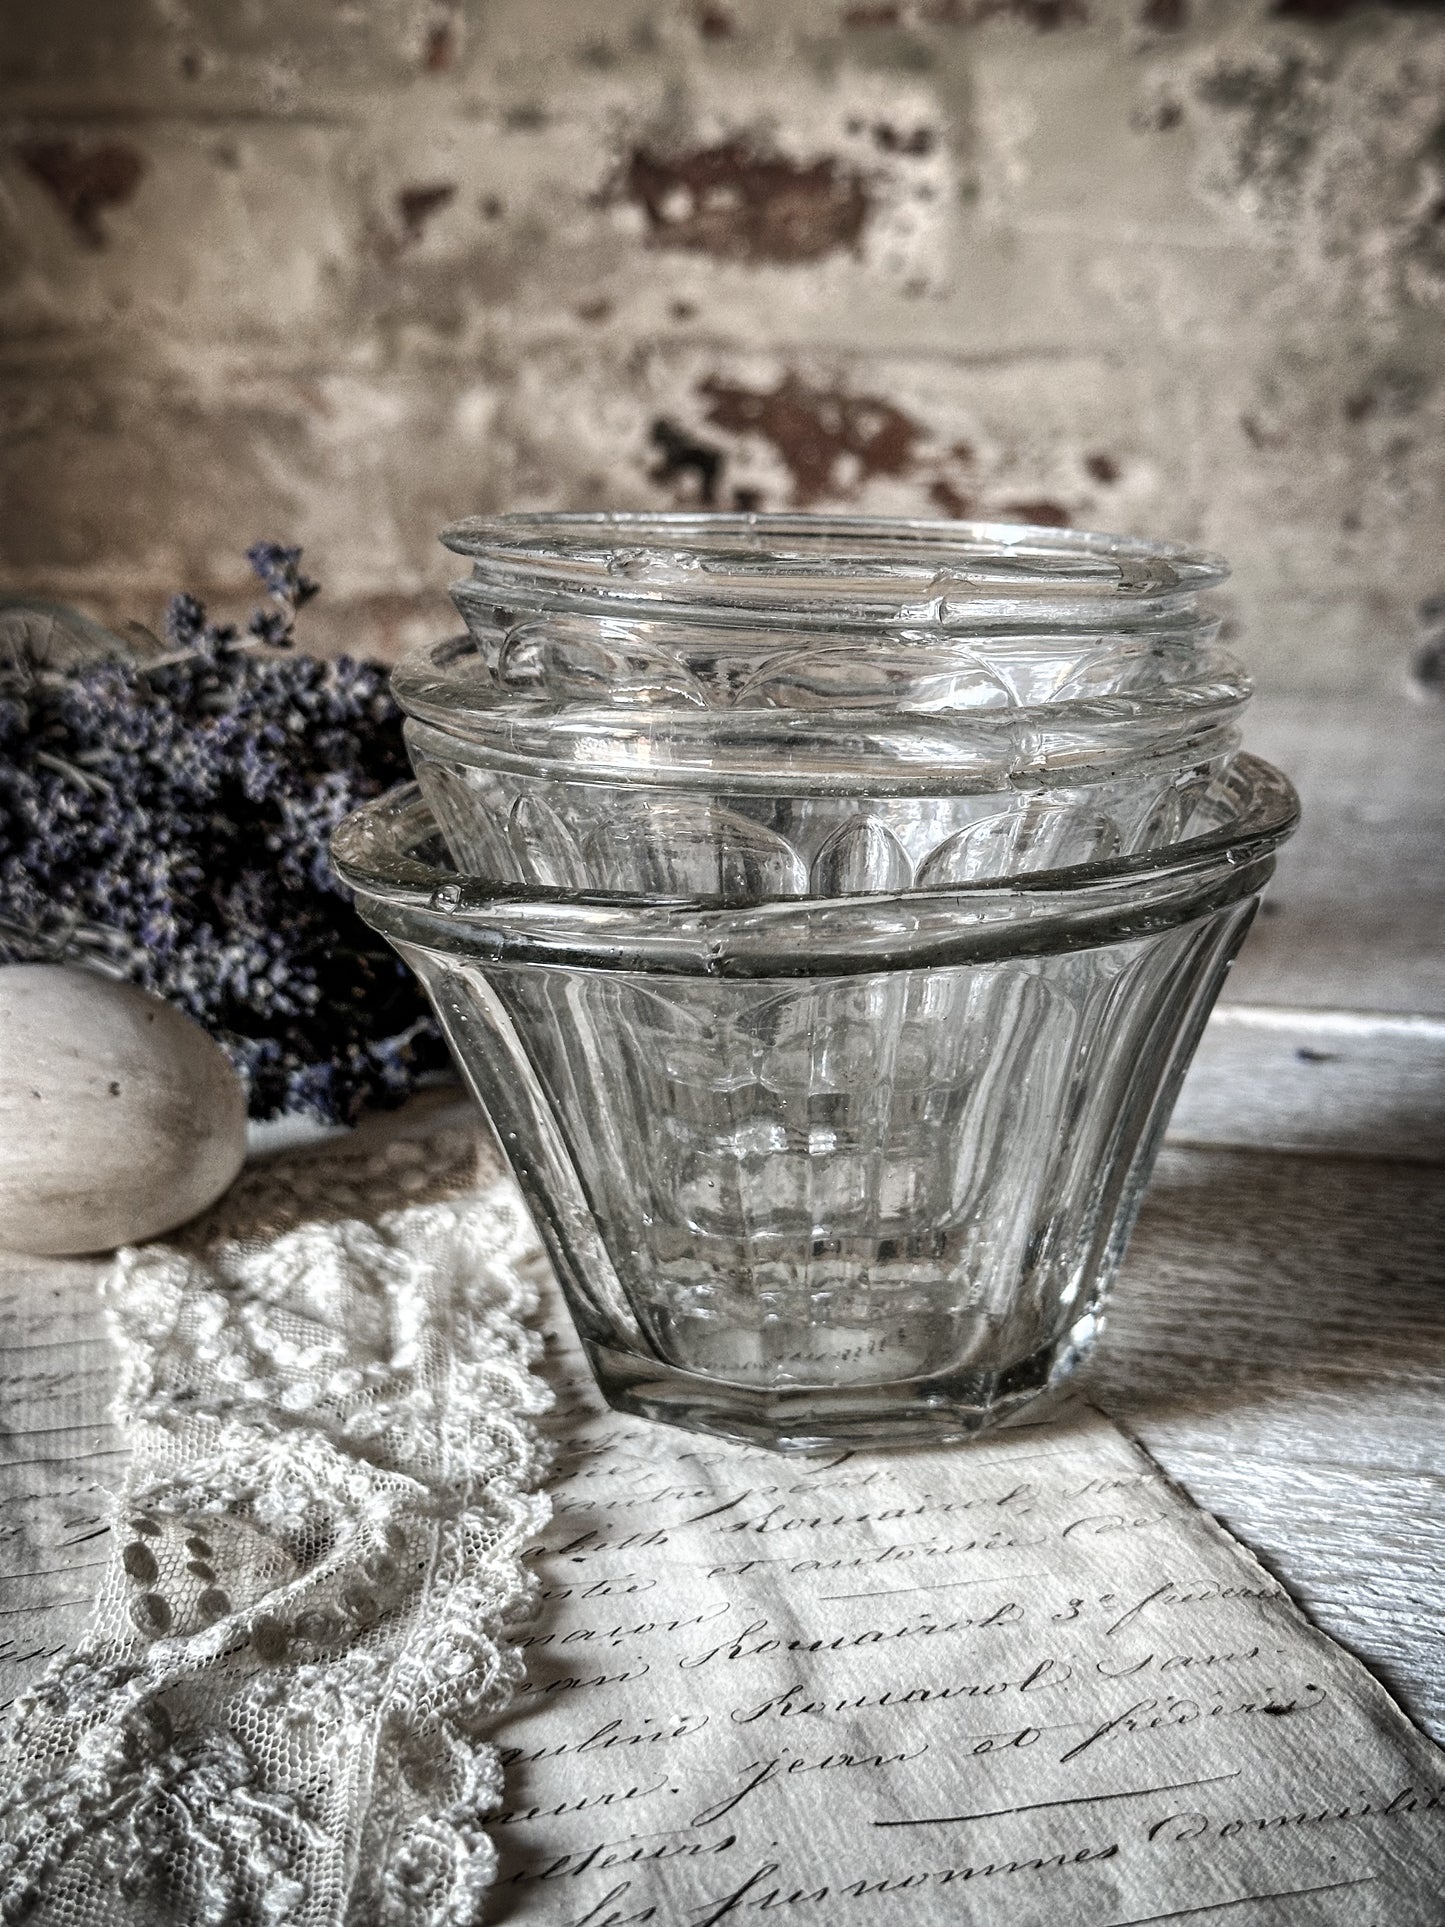 A beautiful French conical confiture jar #8